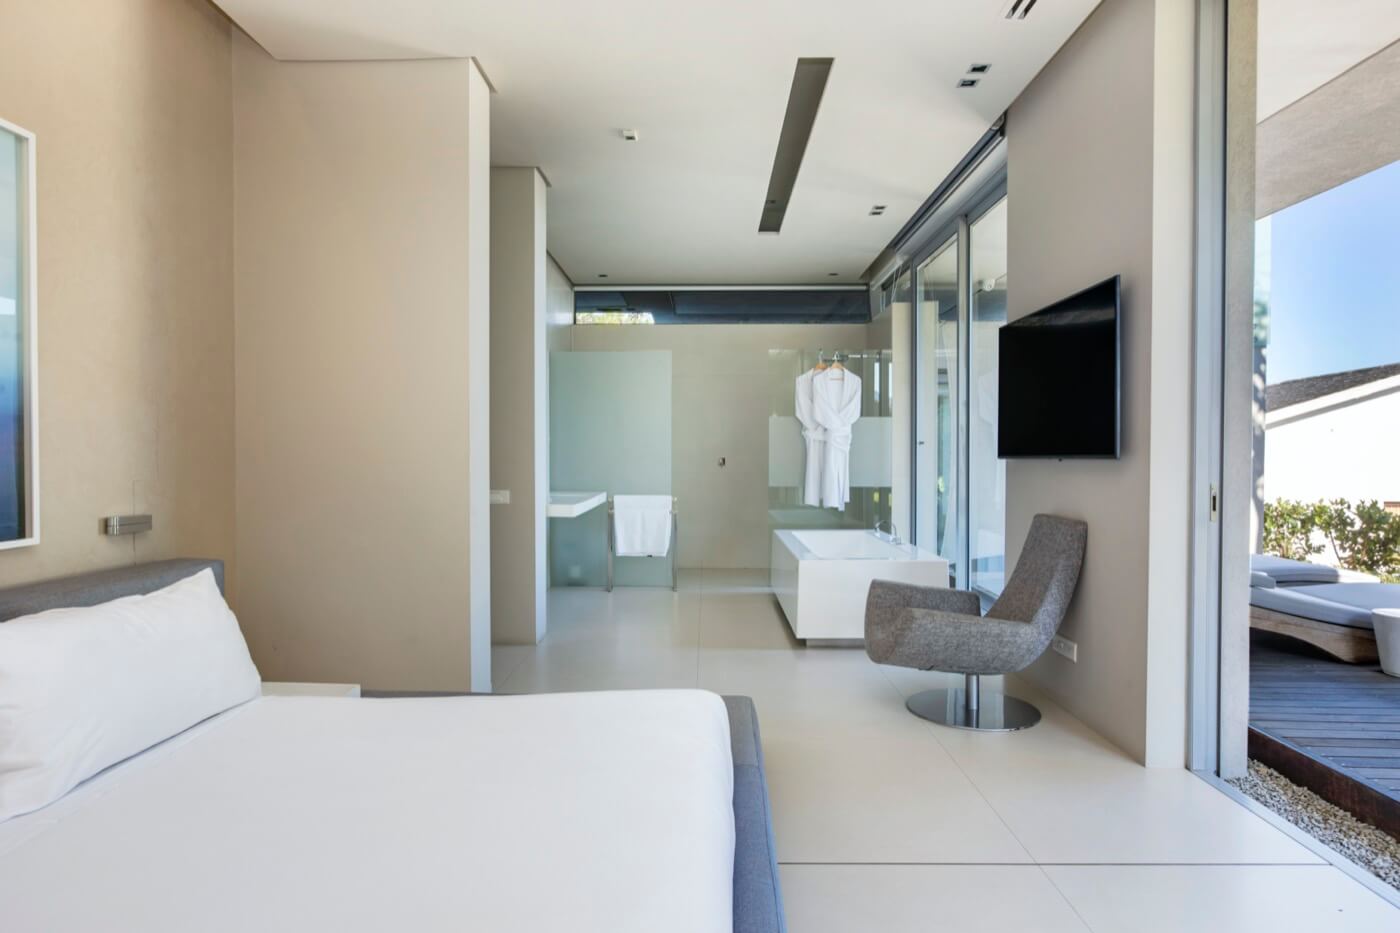 Photo 30 of The Crescent accommodation in Camps Bay, Cape Town with 6 bedrooms and 6.5 bathrooms